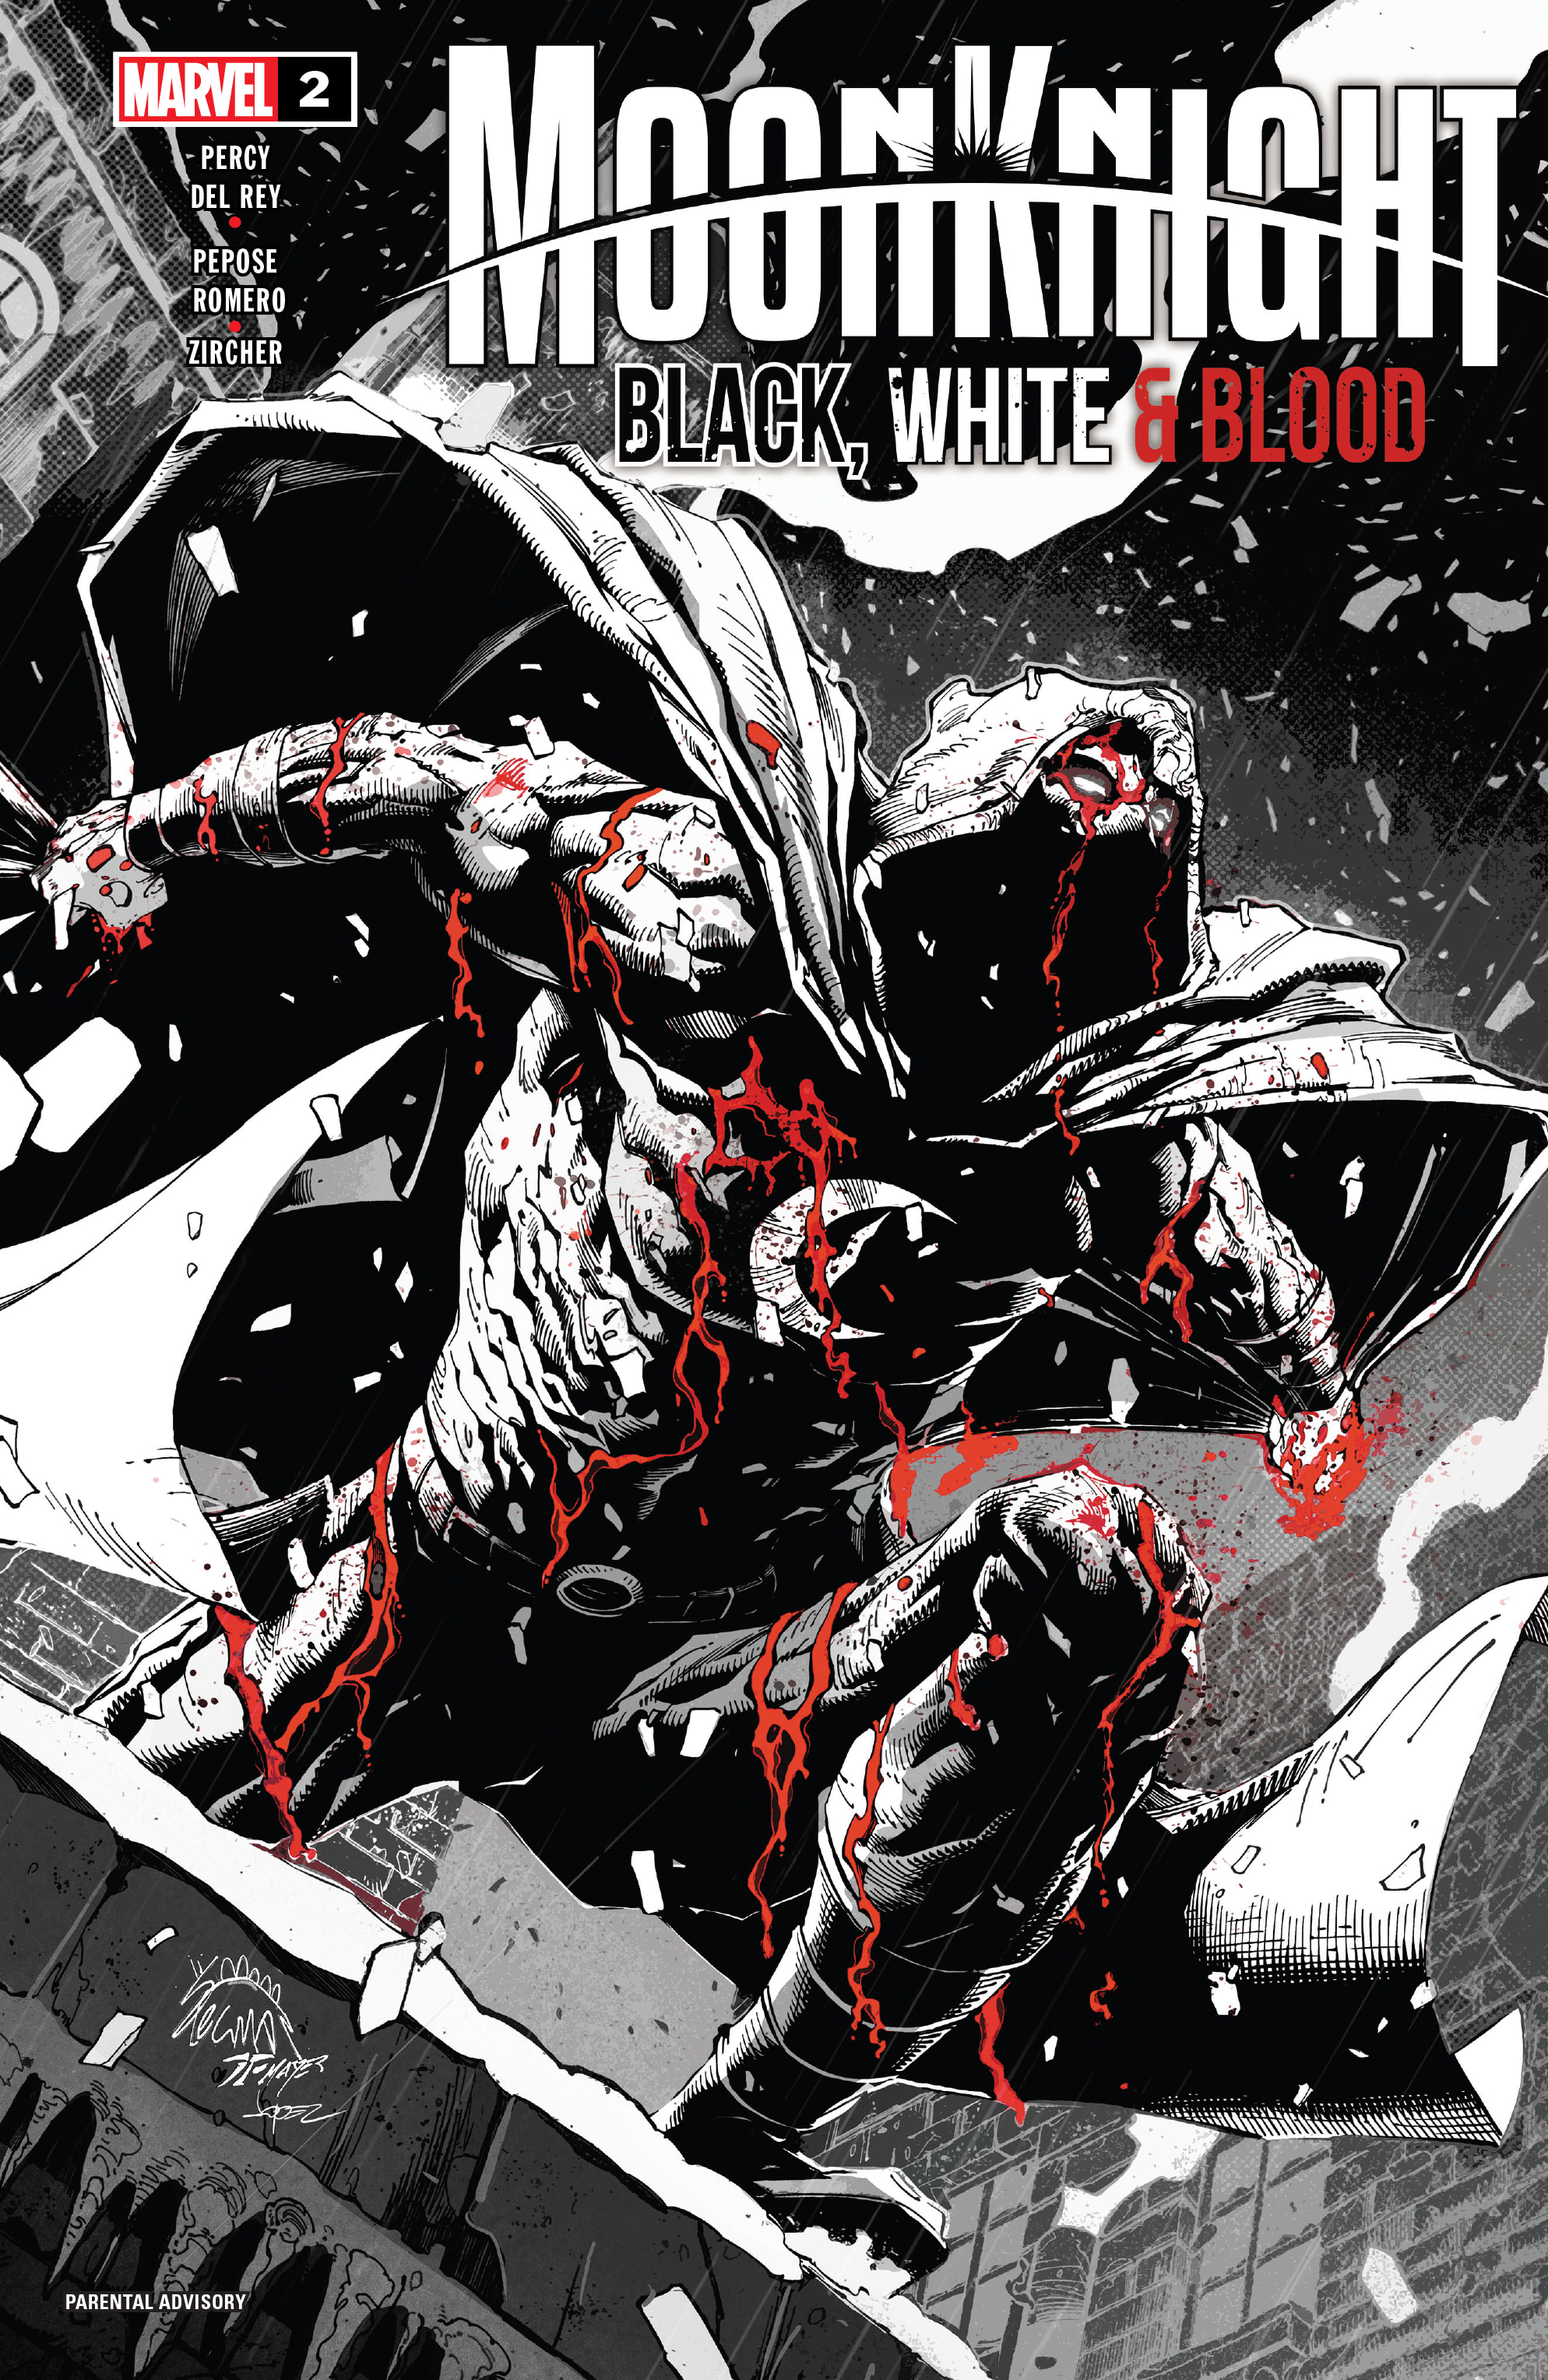 Read online Moon Knight: Black, White & Blood comic -  Issue #2 - 1